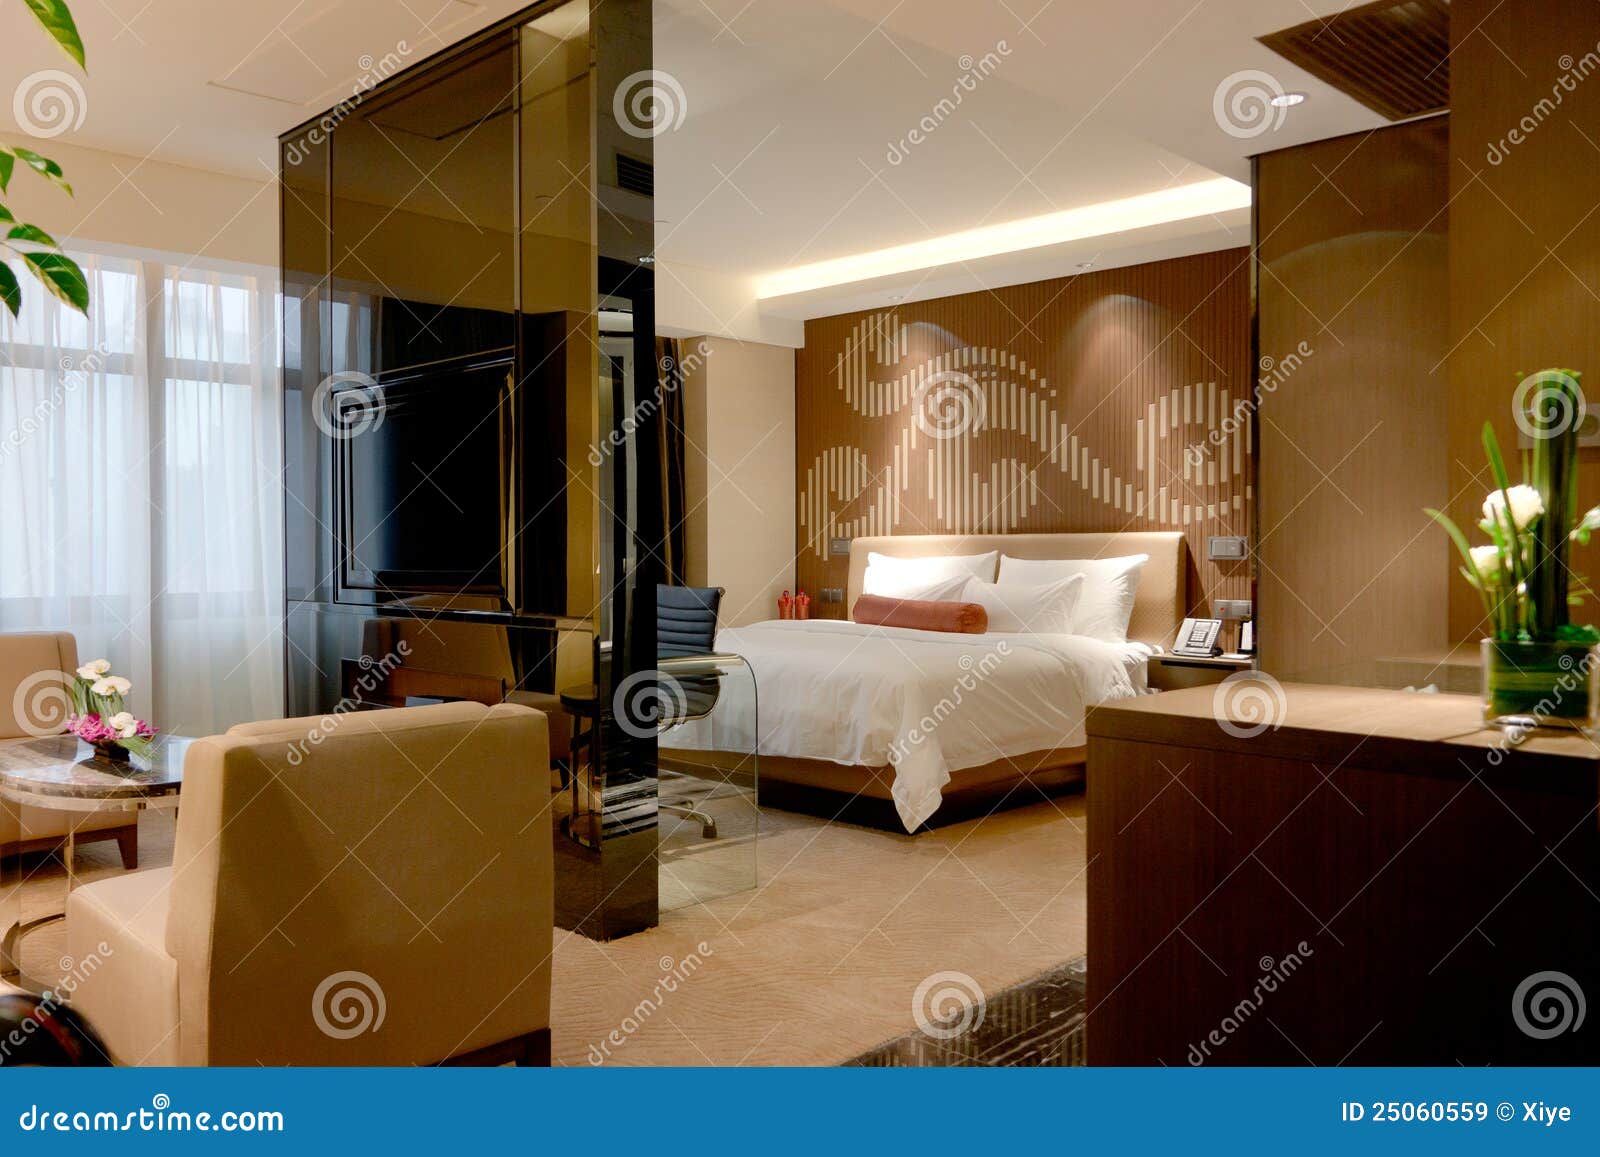 business suite of hotel